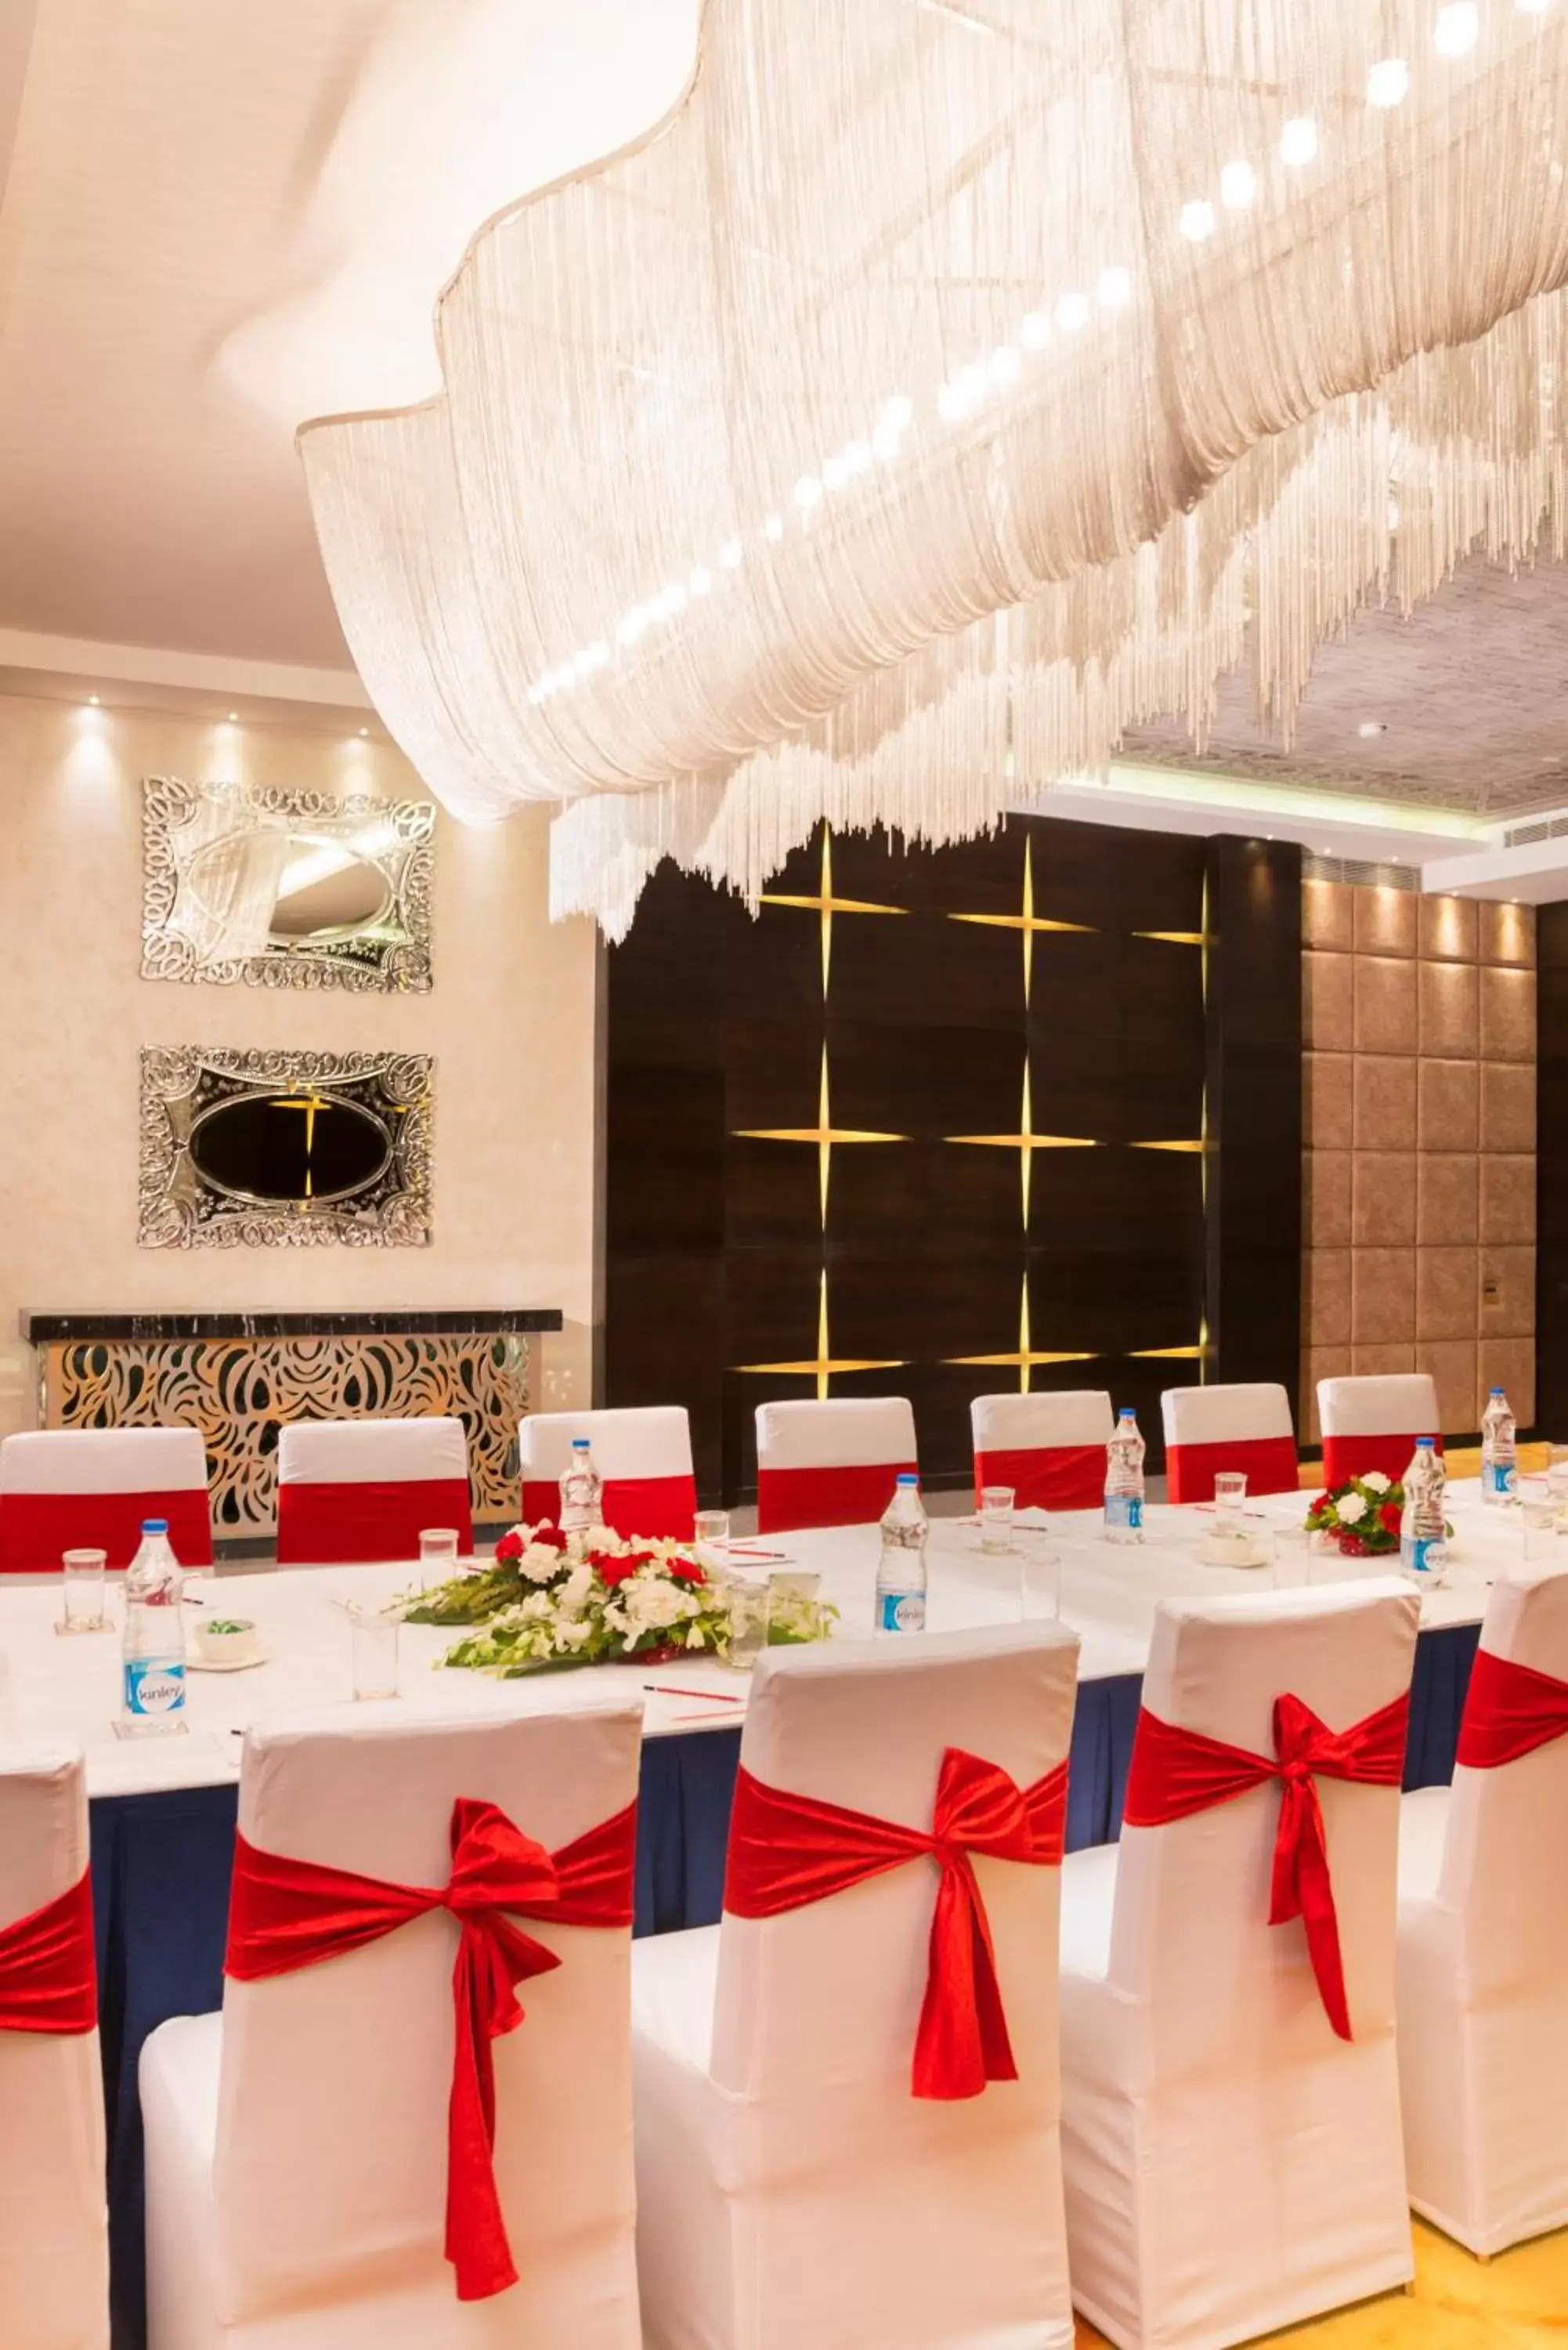 Banquet/Function facilities, Banquet Facilities in Aauris